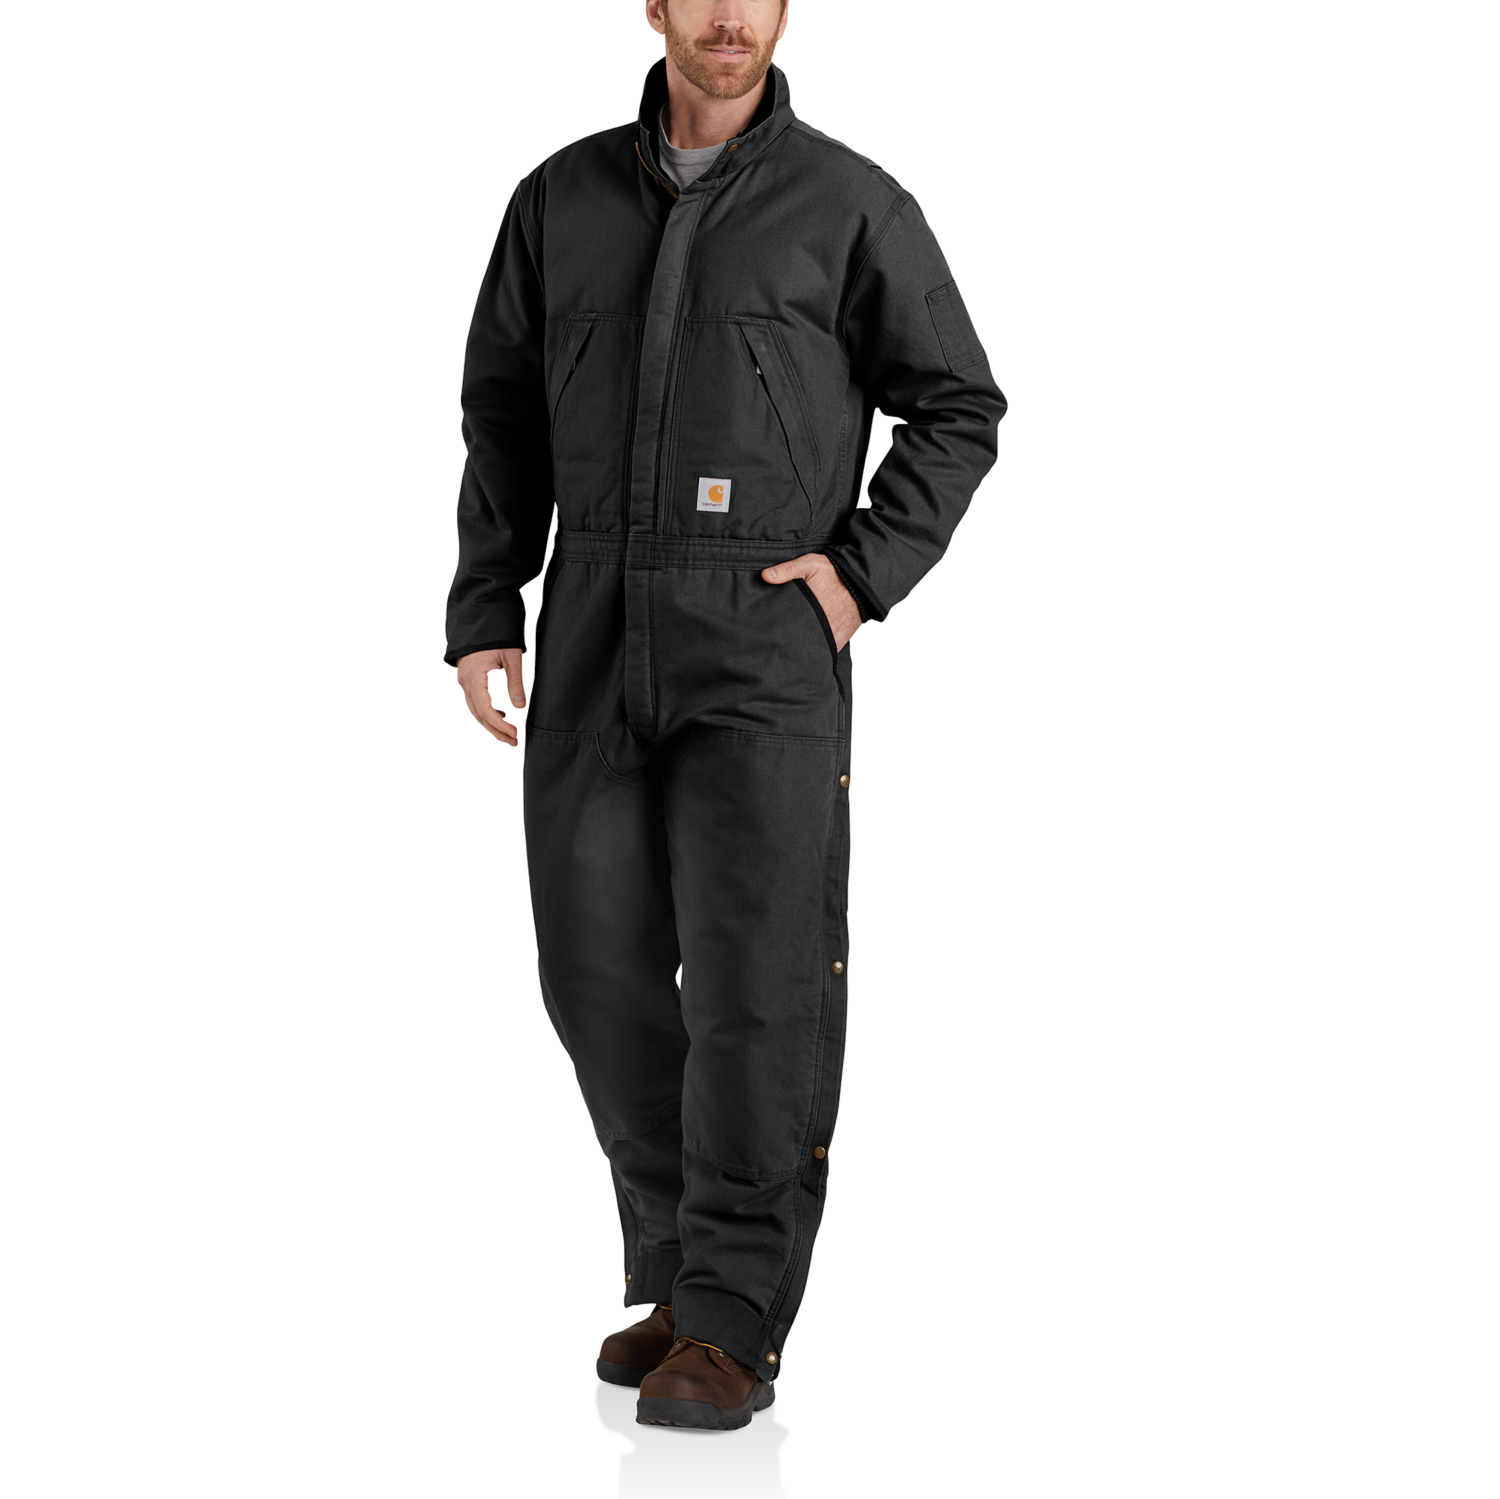 WASHED_DUCK_INSULATED_COVERALL_vkPtYB7ztE